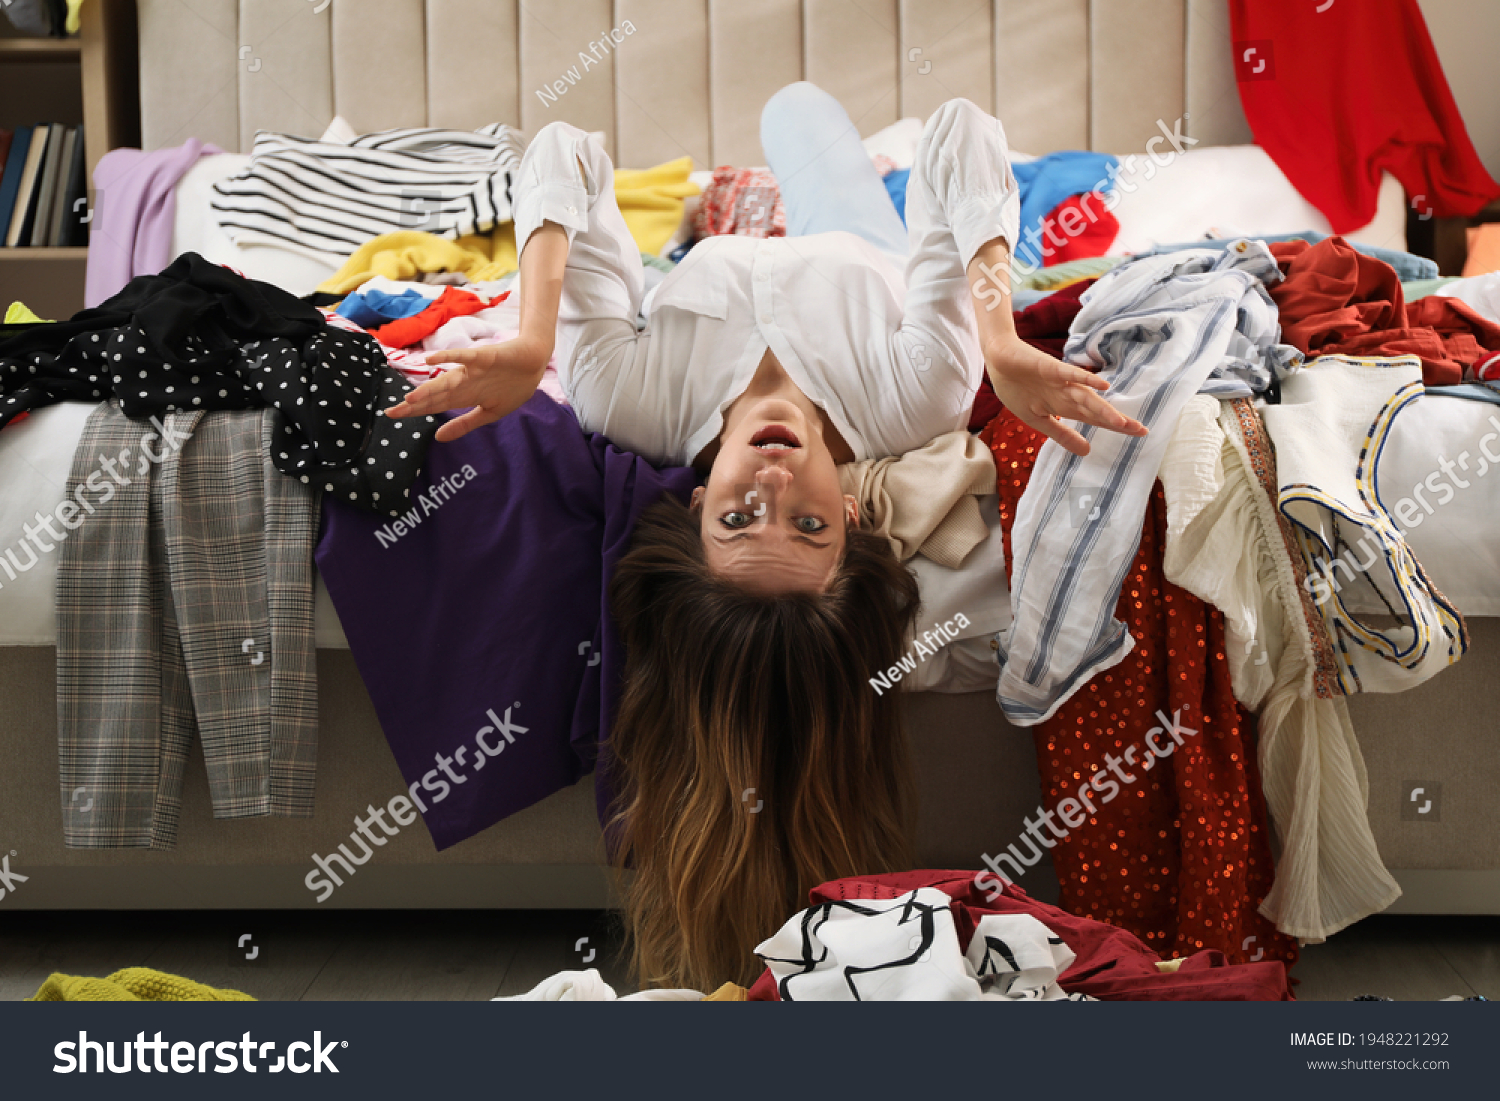 Young woman surrounded by different clothes in messy room. Fast fashion concept #1948221292